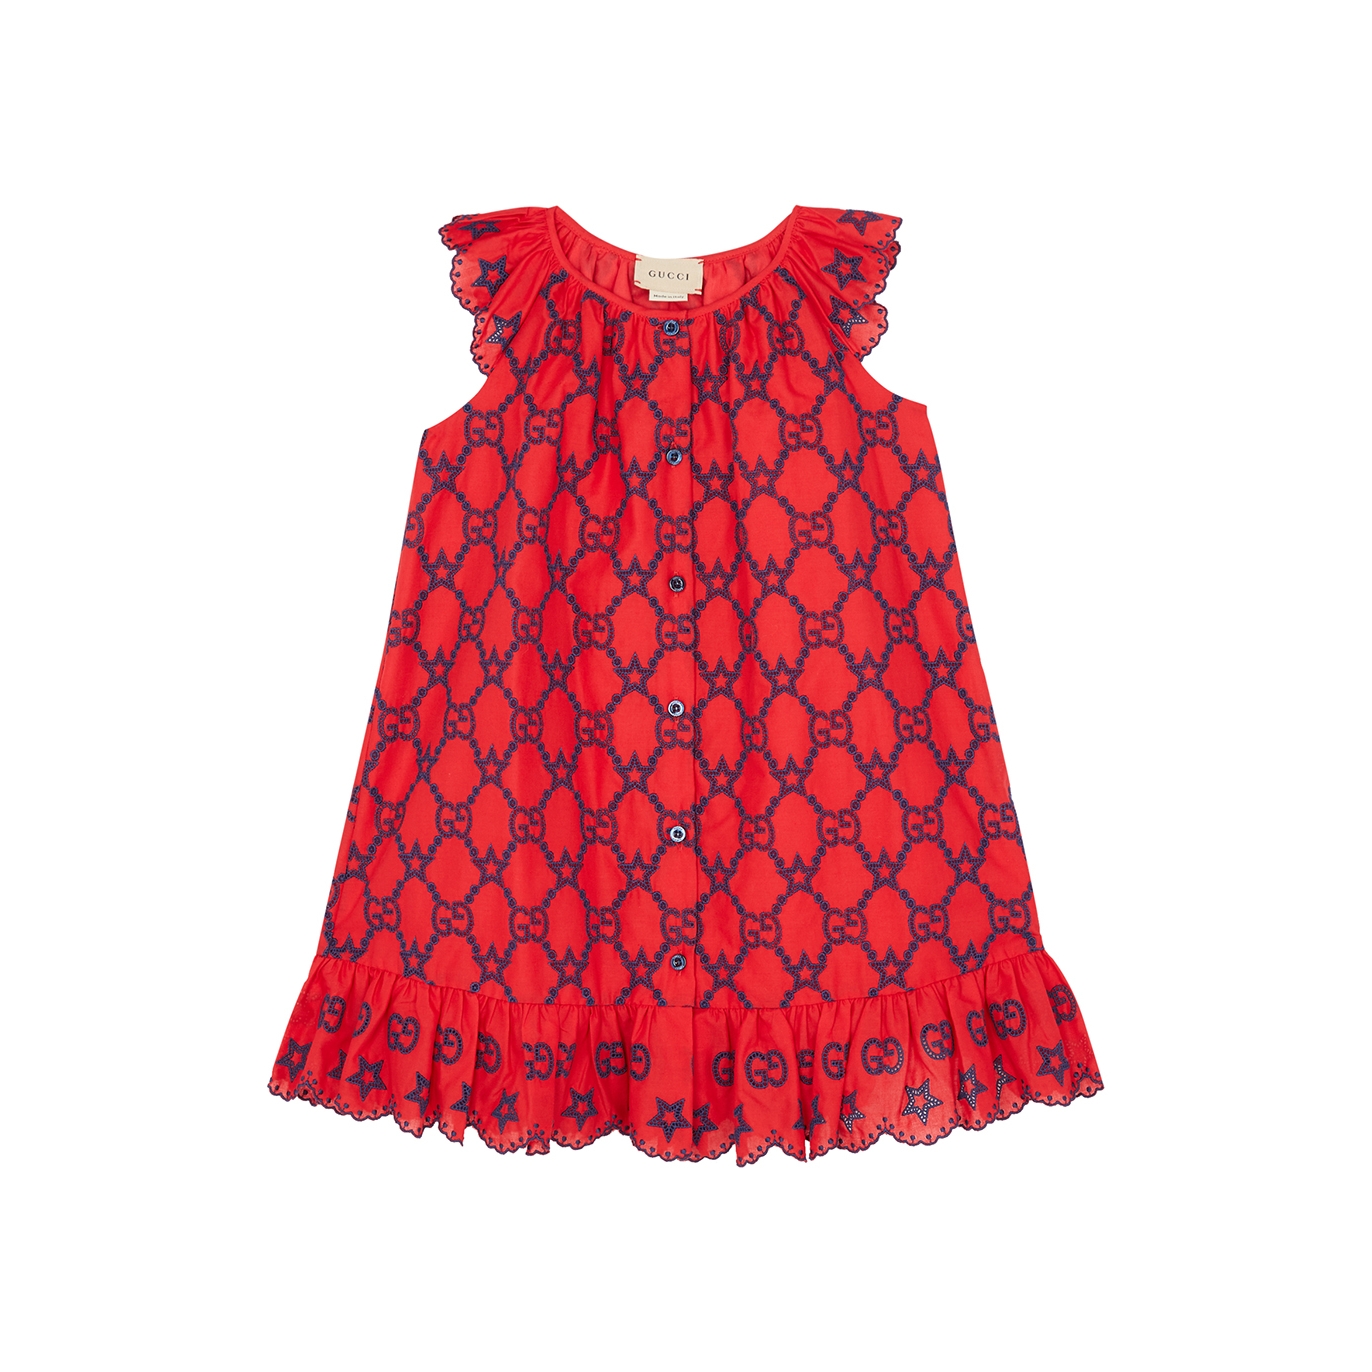 Gucci Kids Red Embroidered Cotton Dress (12-36 Months) - 18 Months